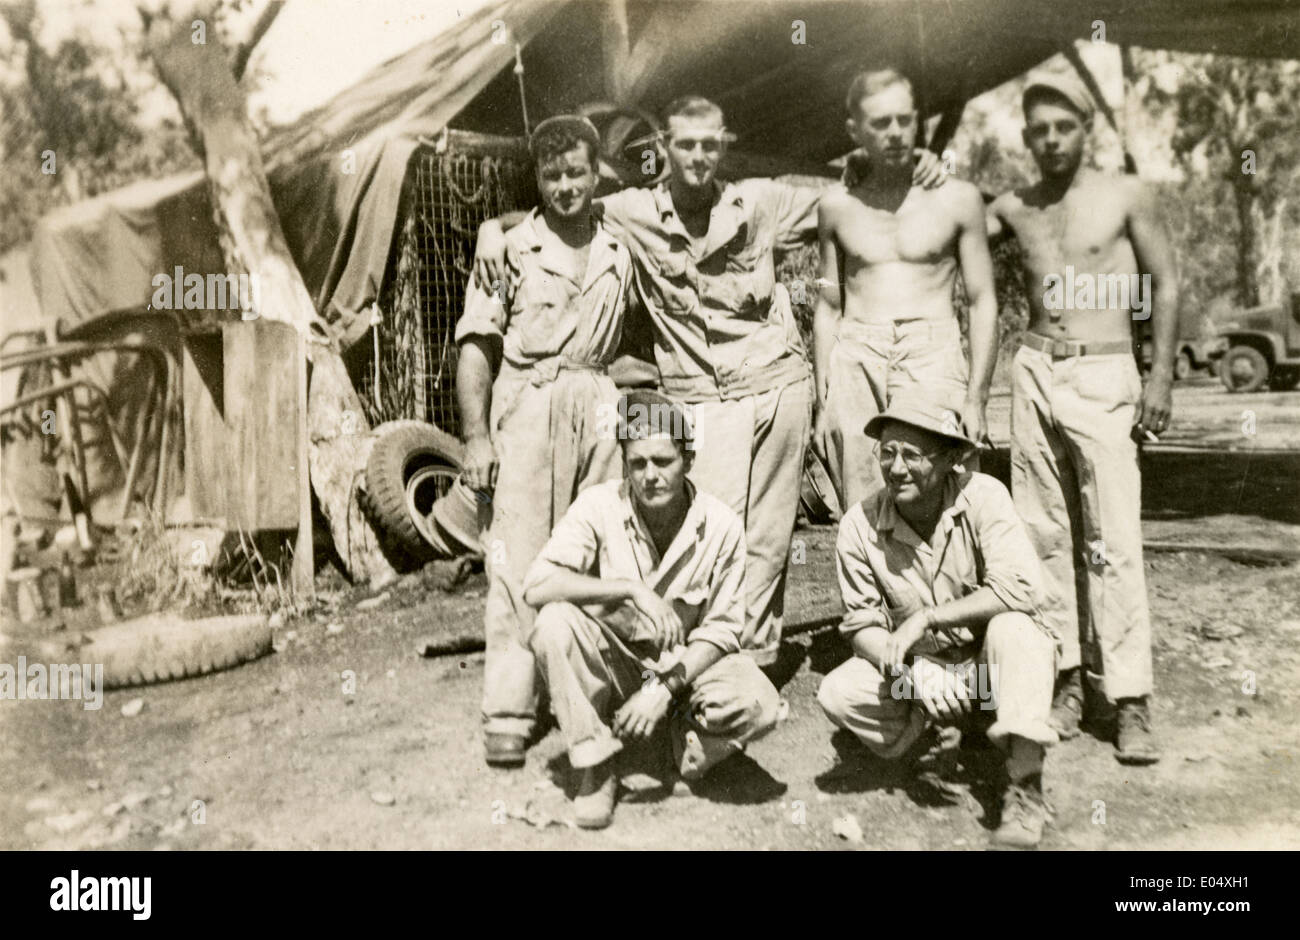 Circa 1944 group photograph, members of the "Flying Tigers" 823rd Bombardment Squadron Medium Transportation. Stock Photo